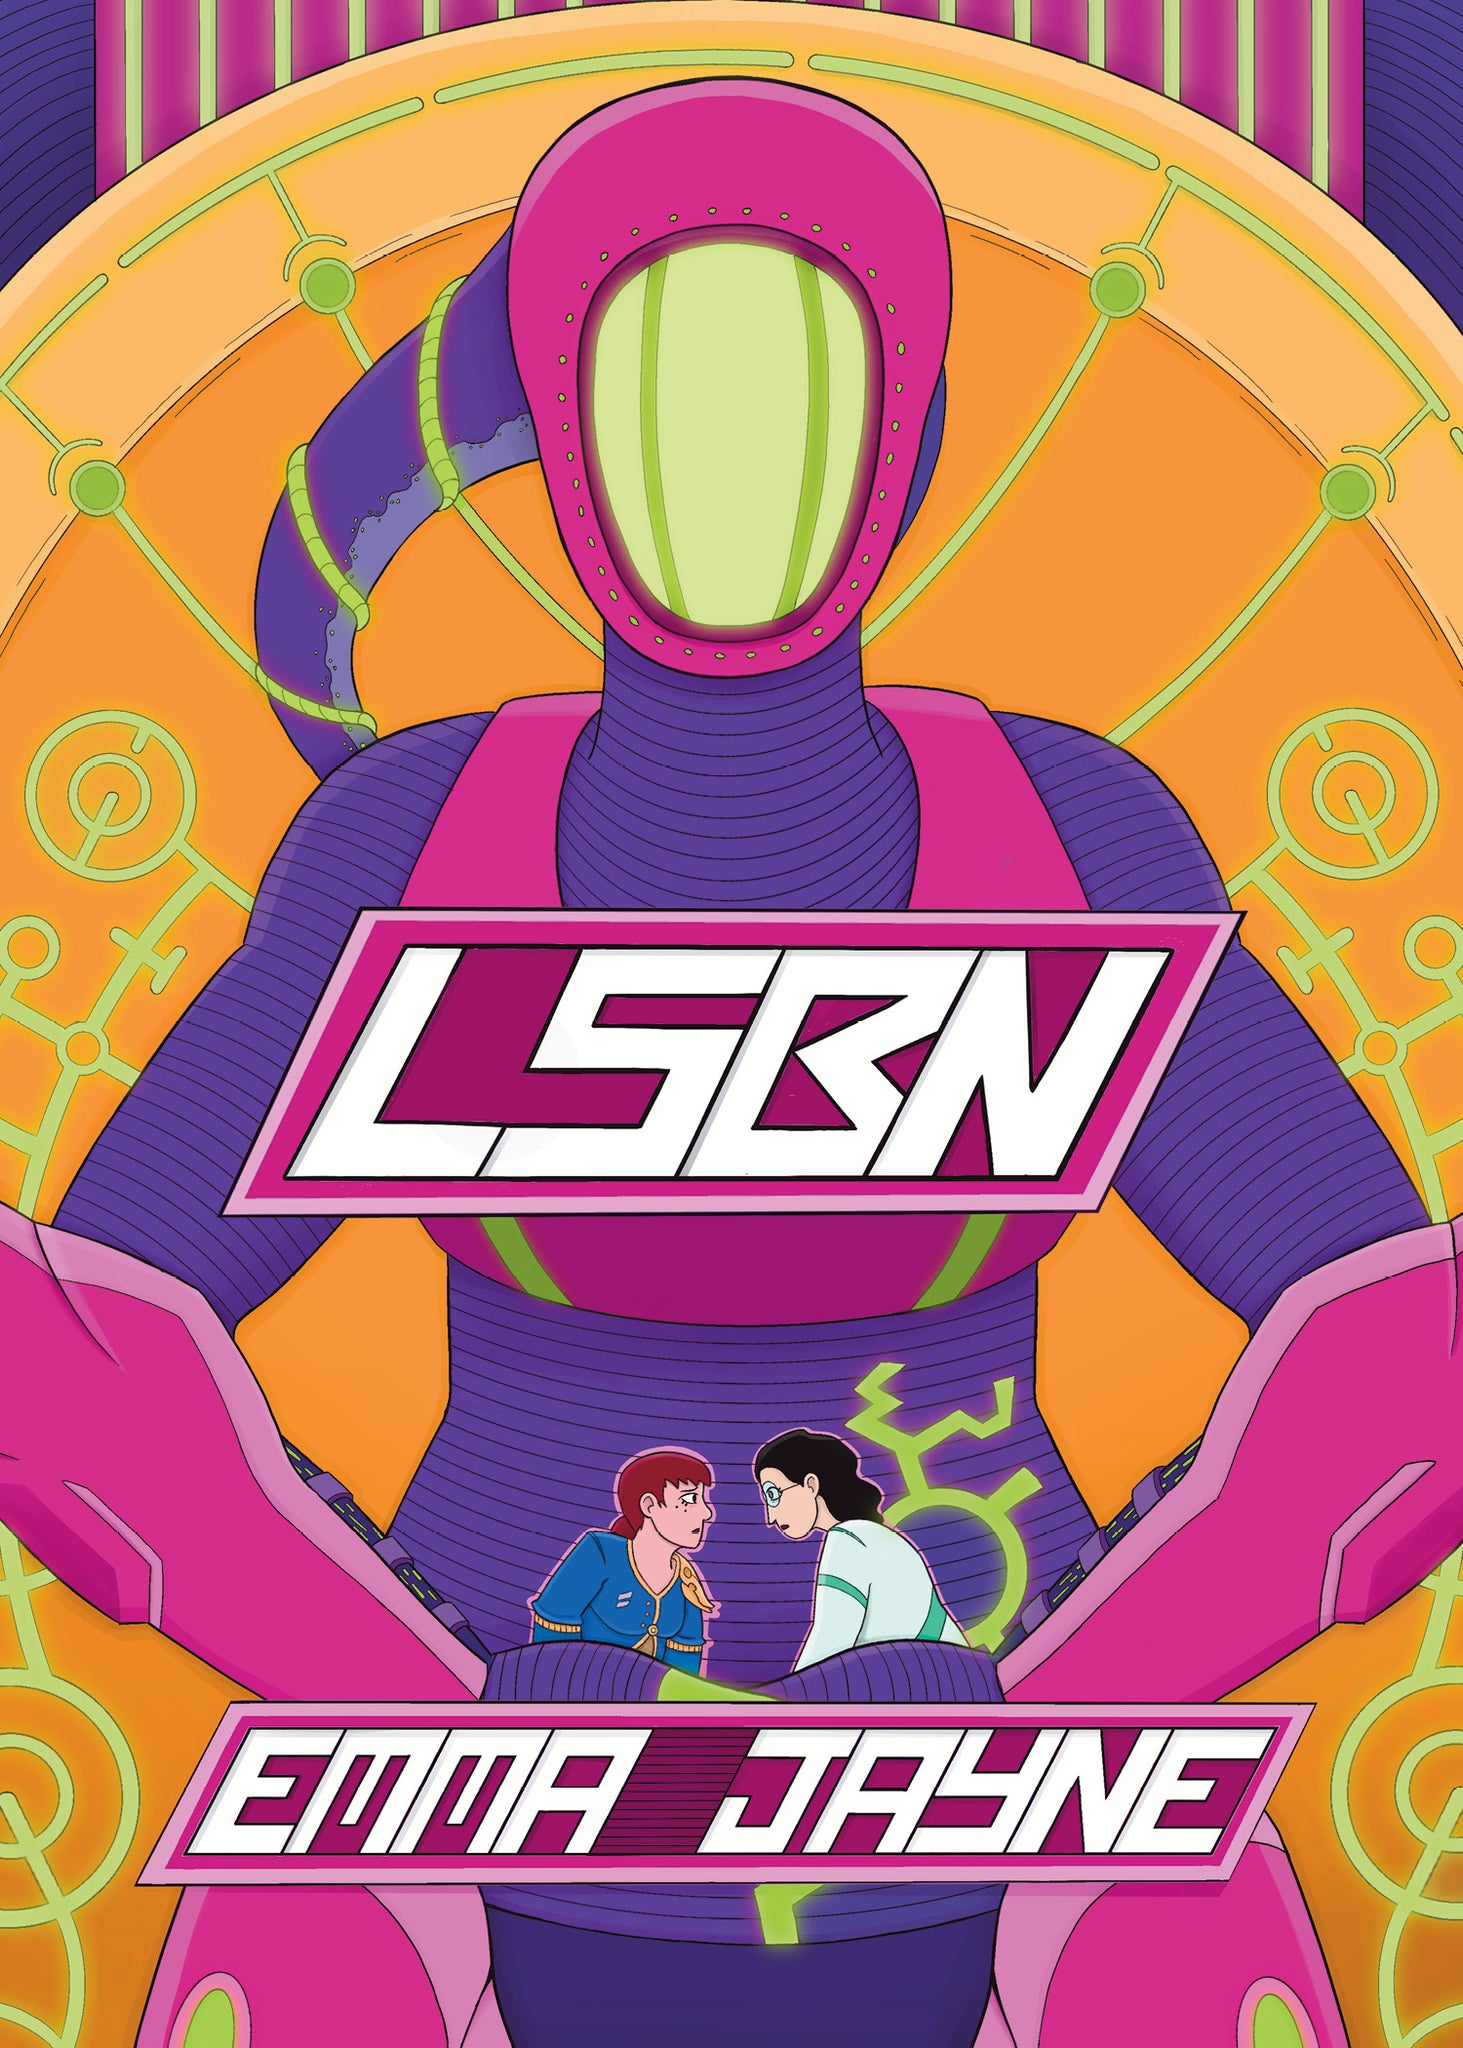 The cover of the graphic novella "LSBN" by Emma Jayne.  A humanoid-mecha, with purple and pink paint and green lights, stands front and center in the cover, holding two women in its hands.  The women are intensely gazing at each other, their expressions hesitant 